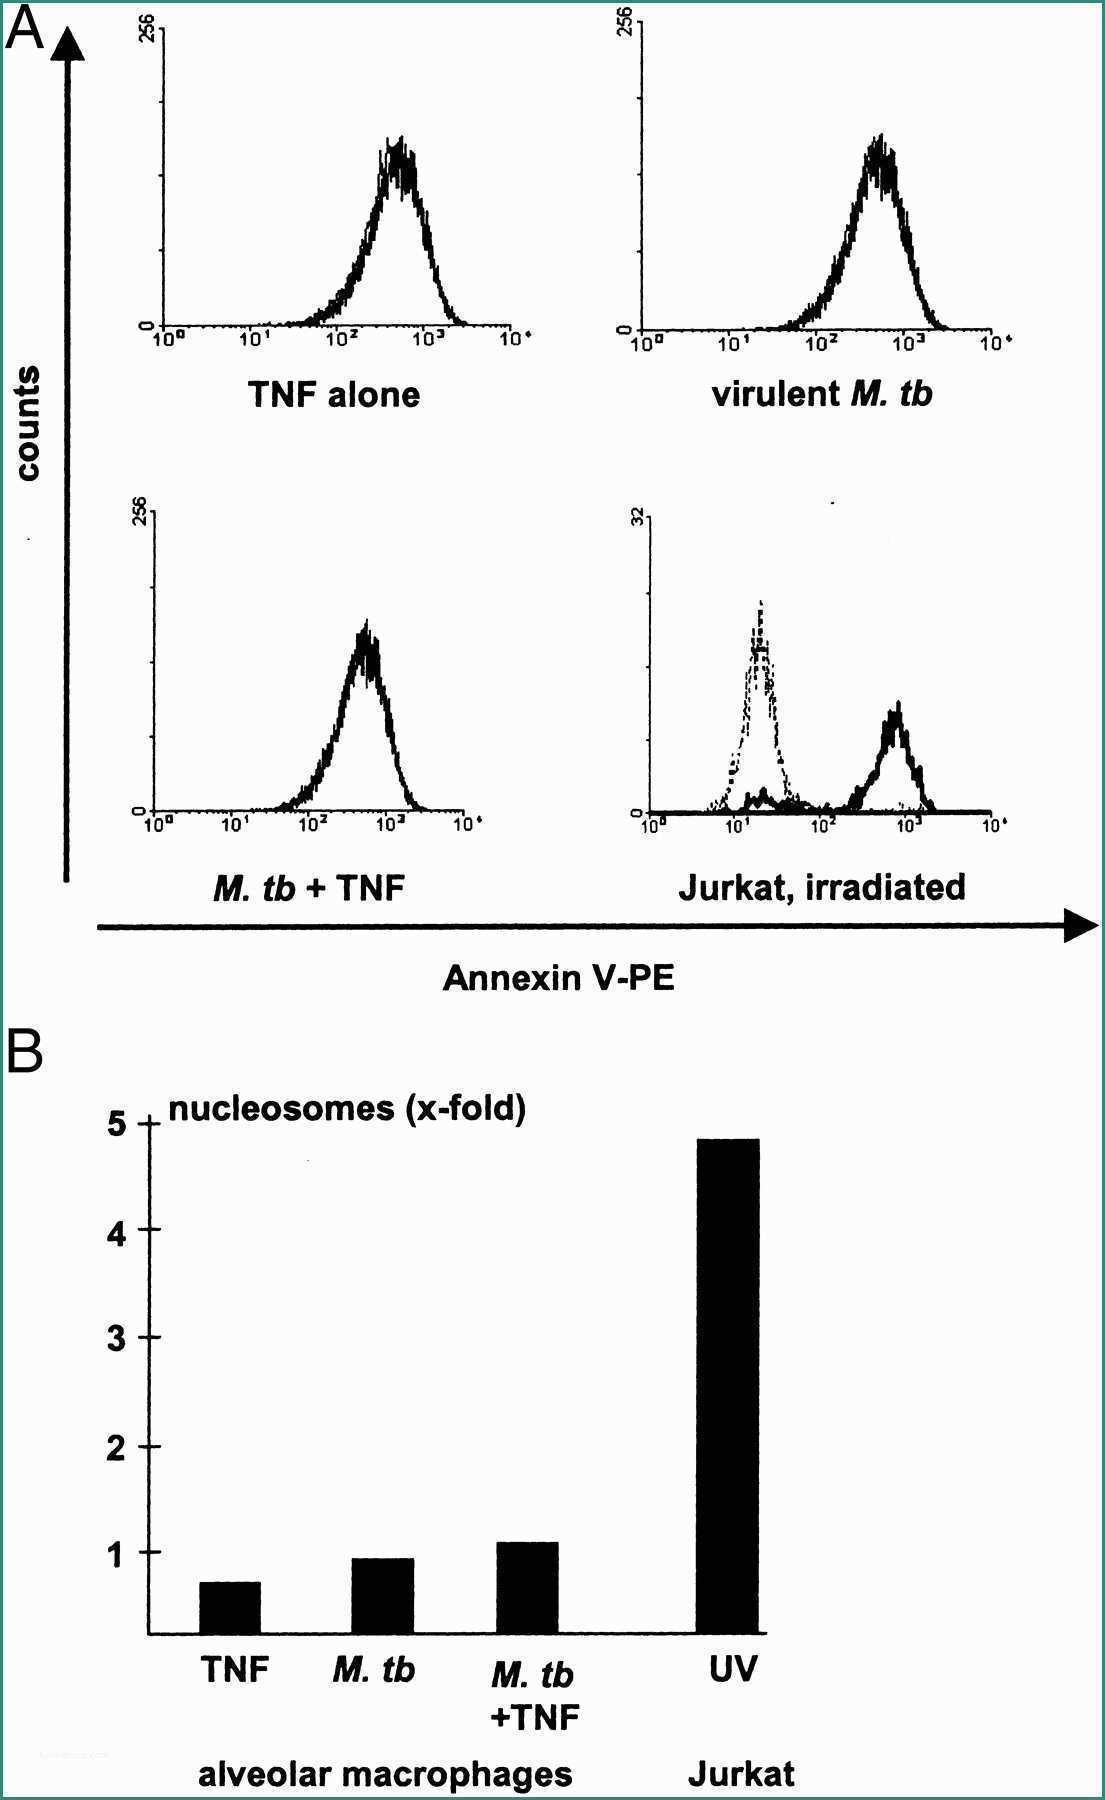 Ssml Gregorio Vii E Induction Of Tnf In Human Alveolar Macrophages as A Potential